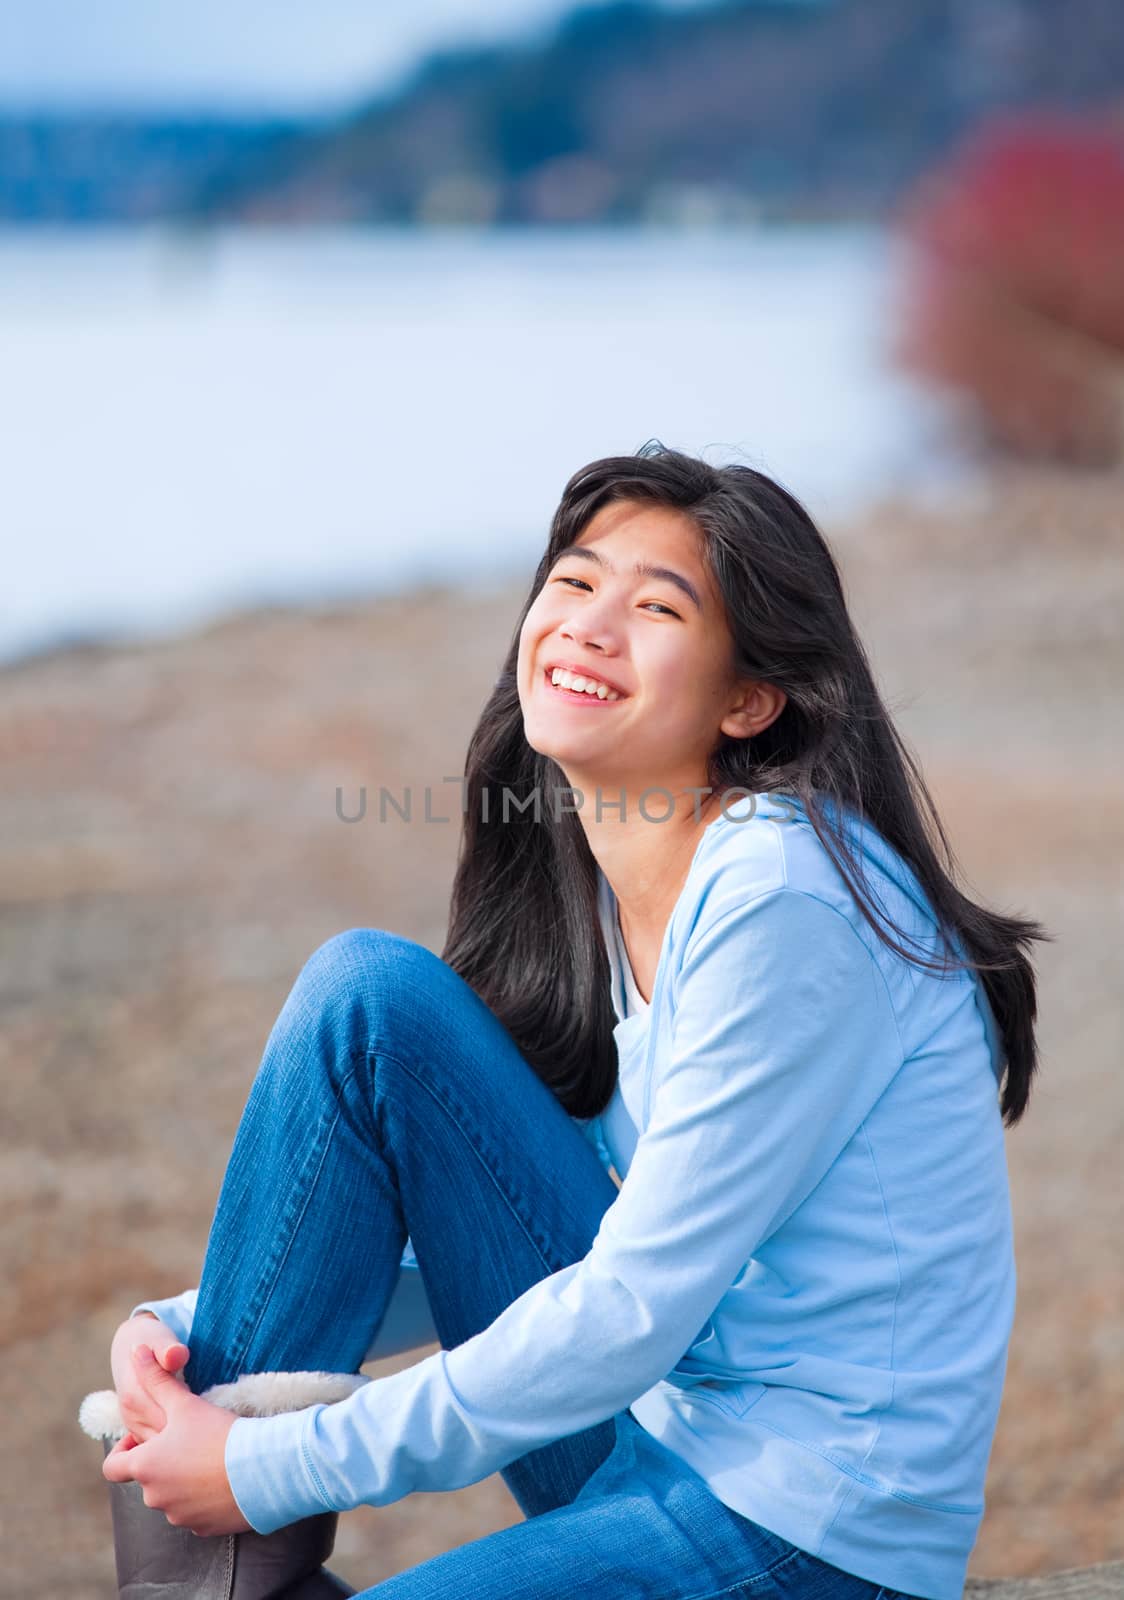 Young biracial teen girl in blue shirt and jeans sitting along rocky lake shore on bright overcast day outdoors